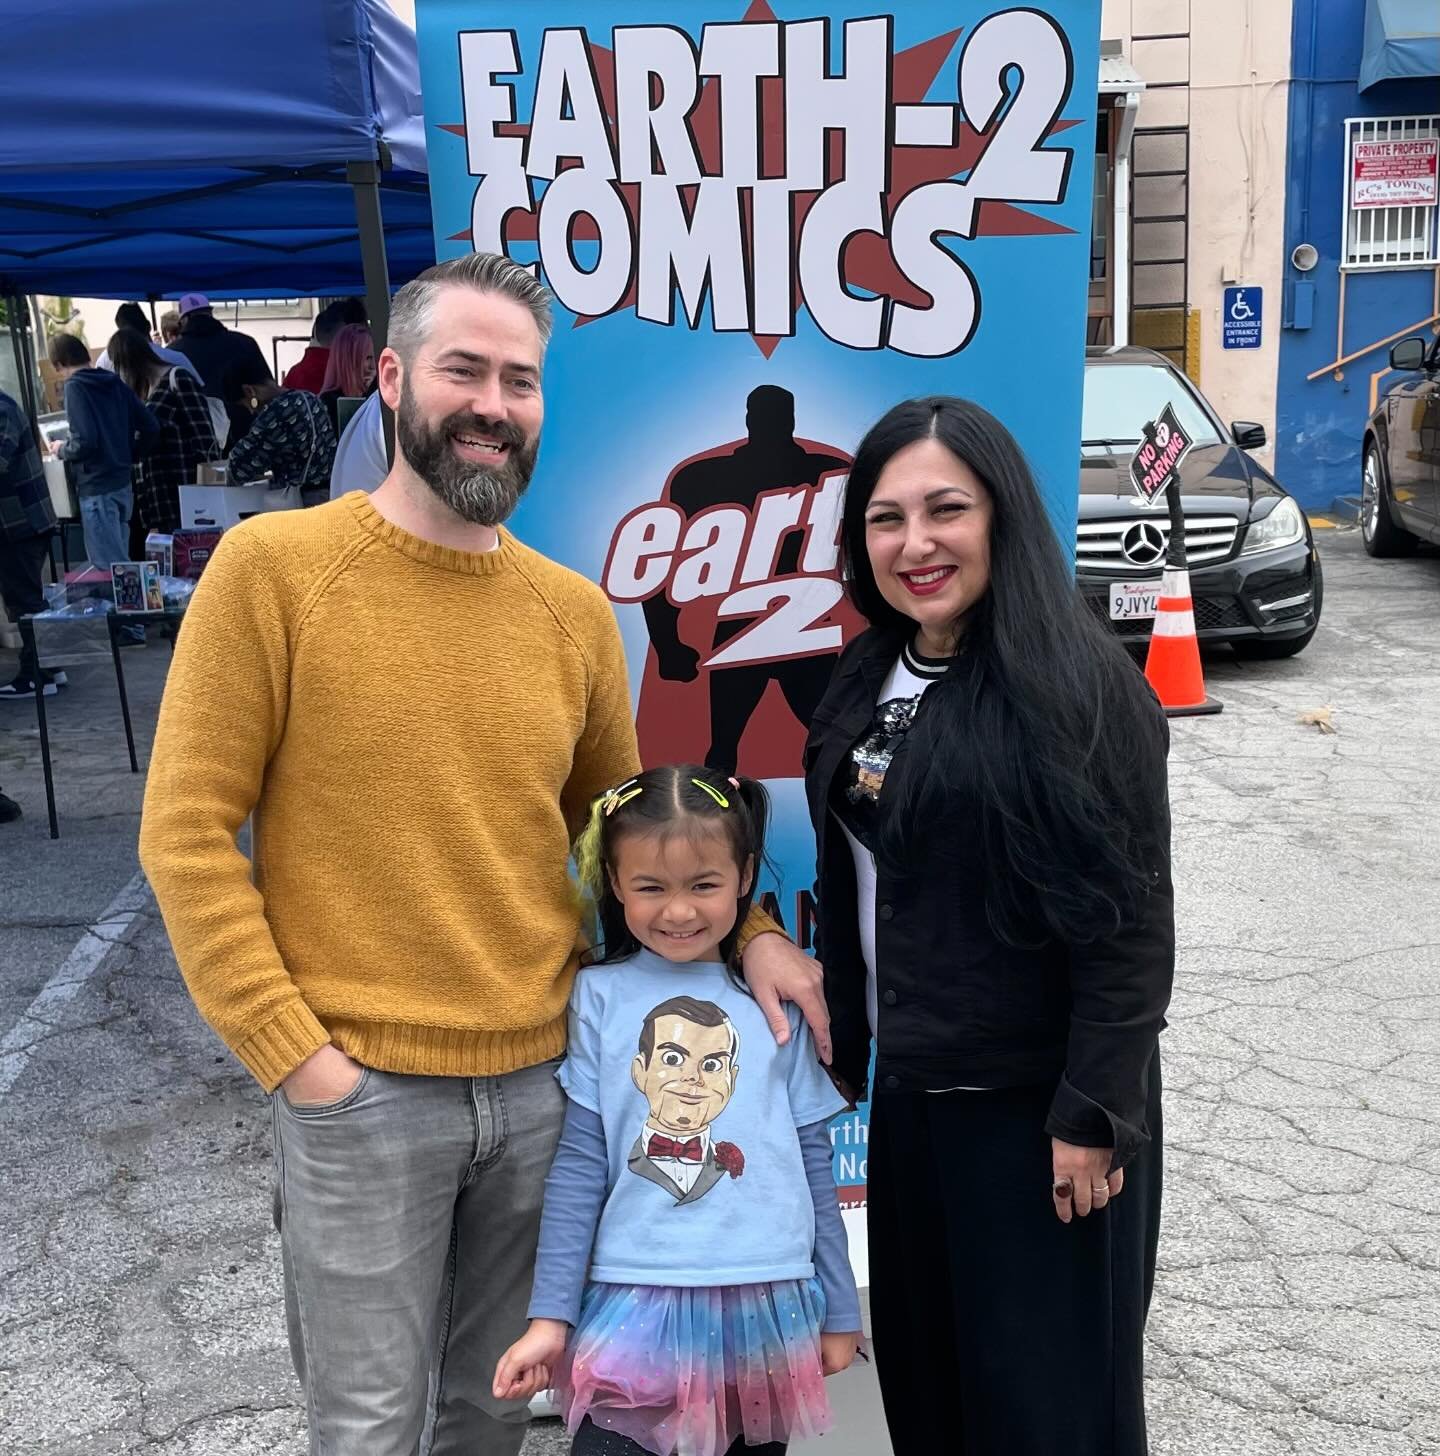 Free Comic Book Day @earth_2_comics was a blast. People were lined up down block and clambering to get in, thirsty for comics. 

Comic weren&rsquo;t even the best part of the event either, because if you came out you got to spend some quality time wi